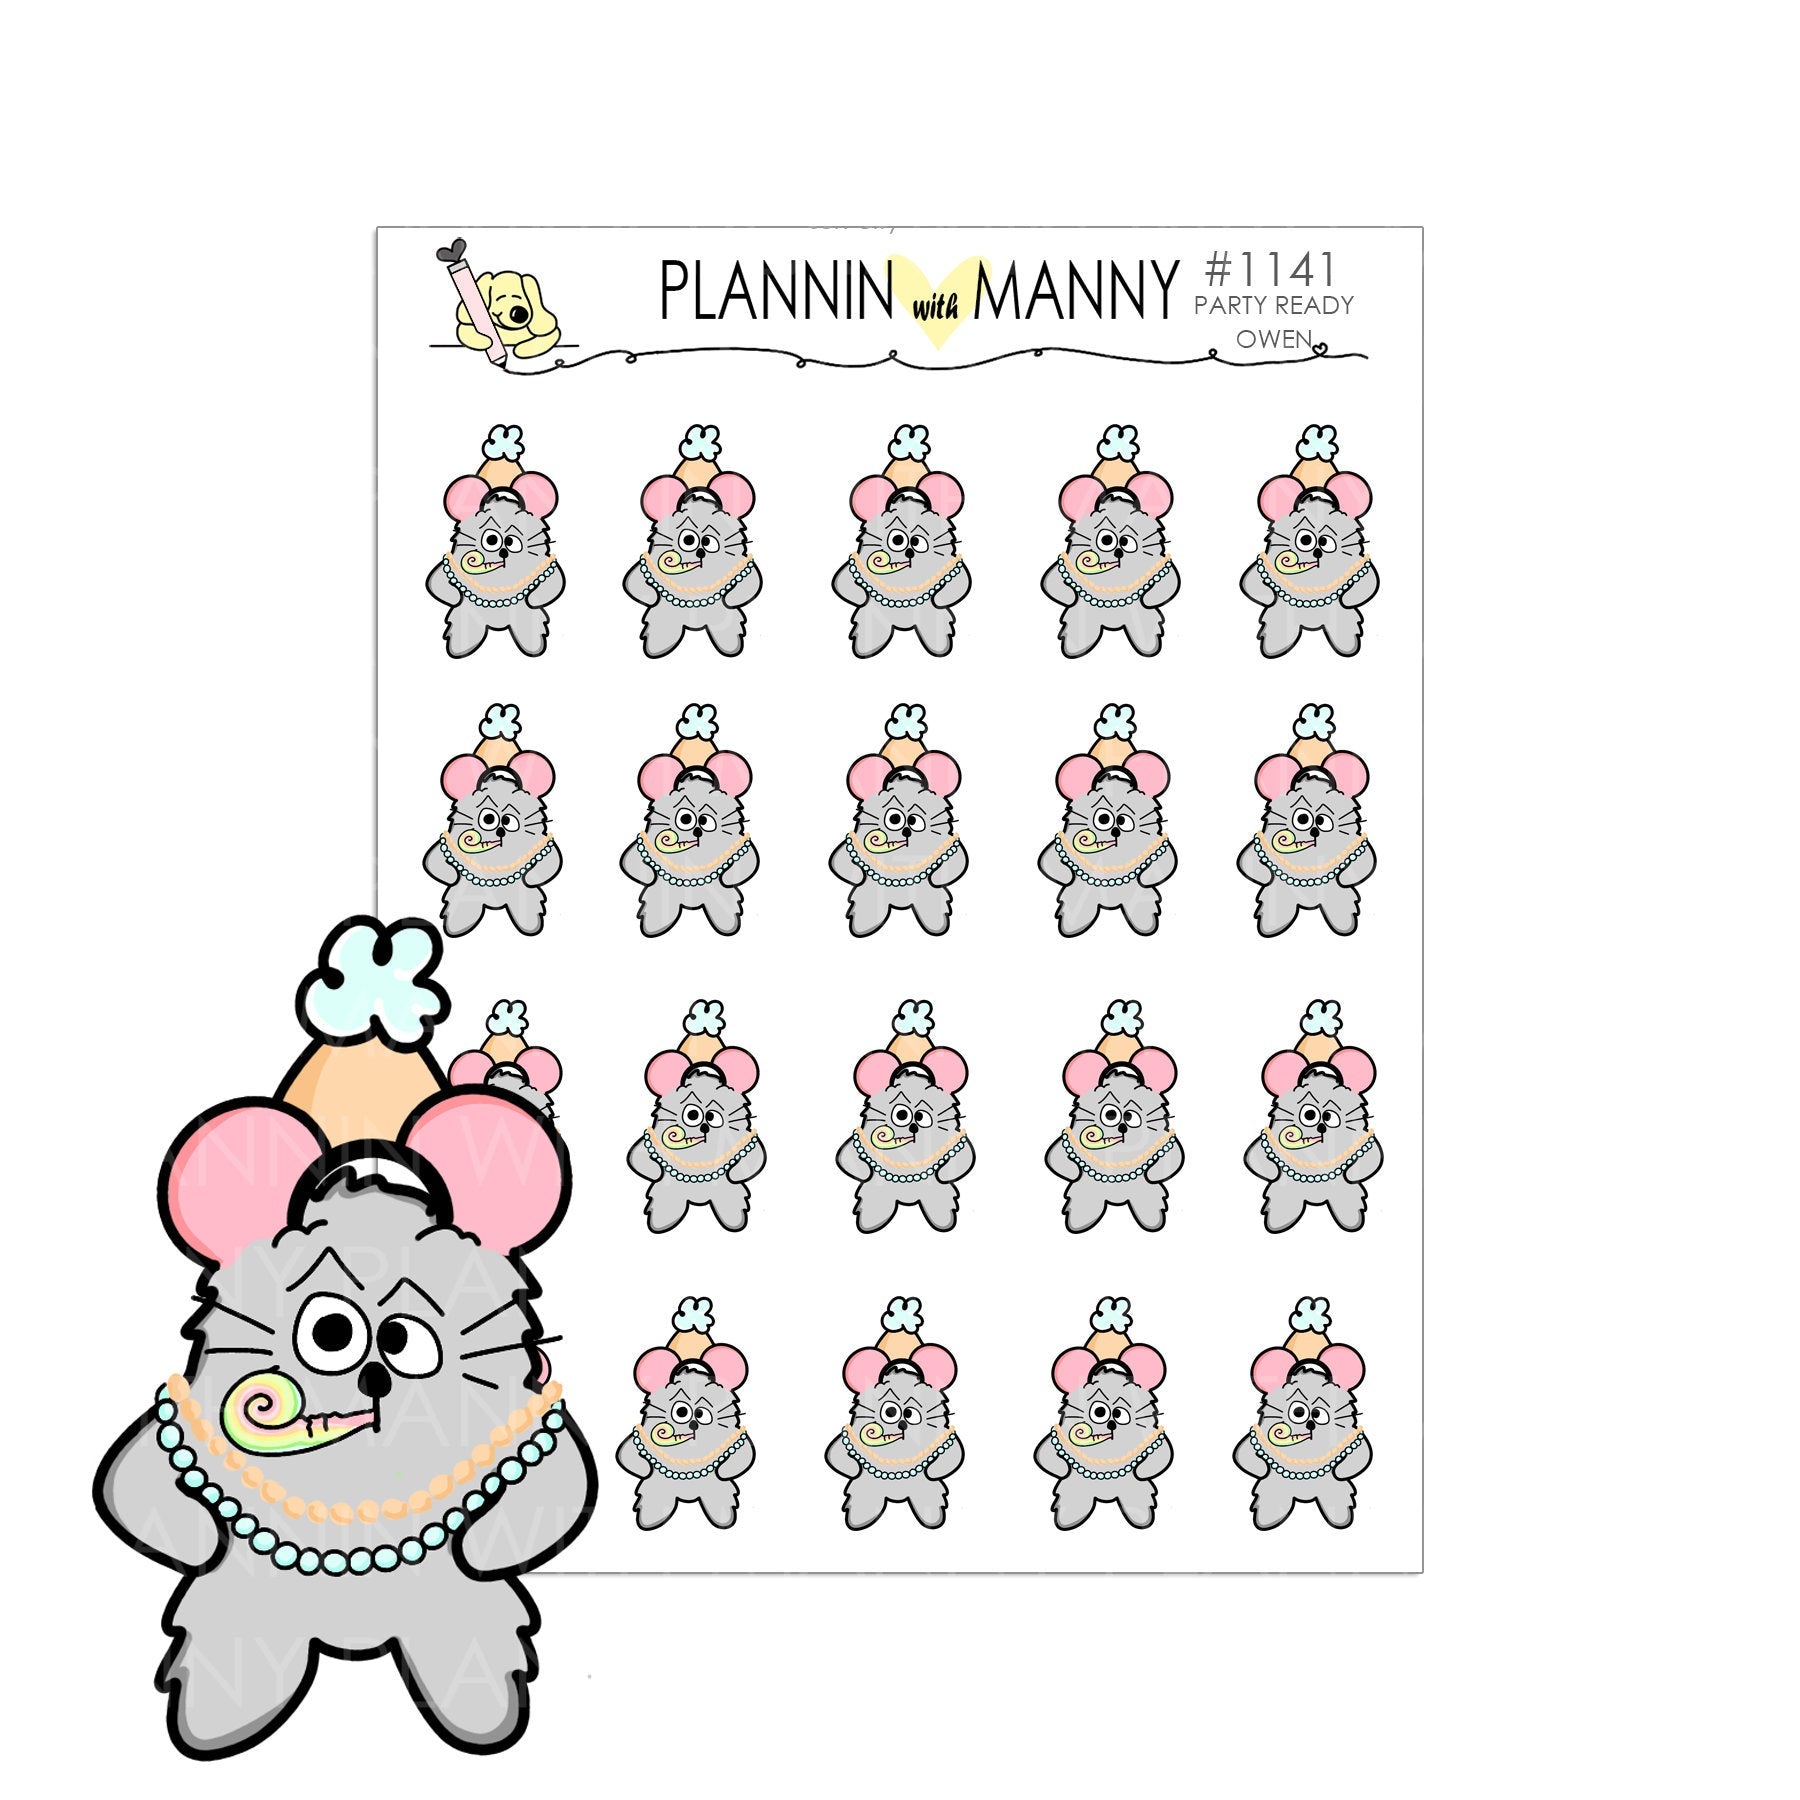 1141 READY TO PARTY Owen Planner Stickers